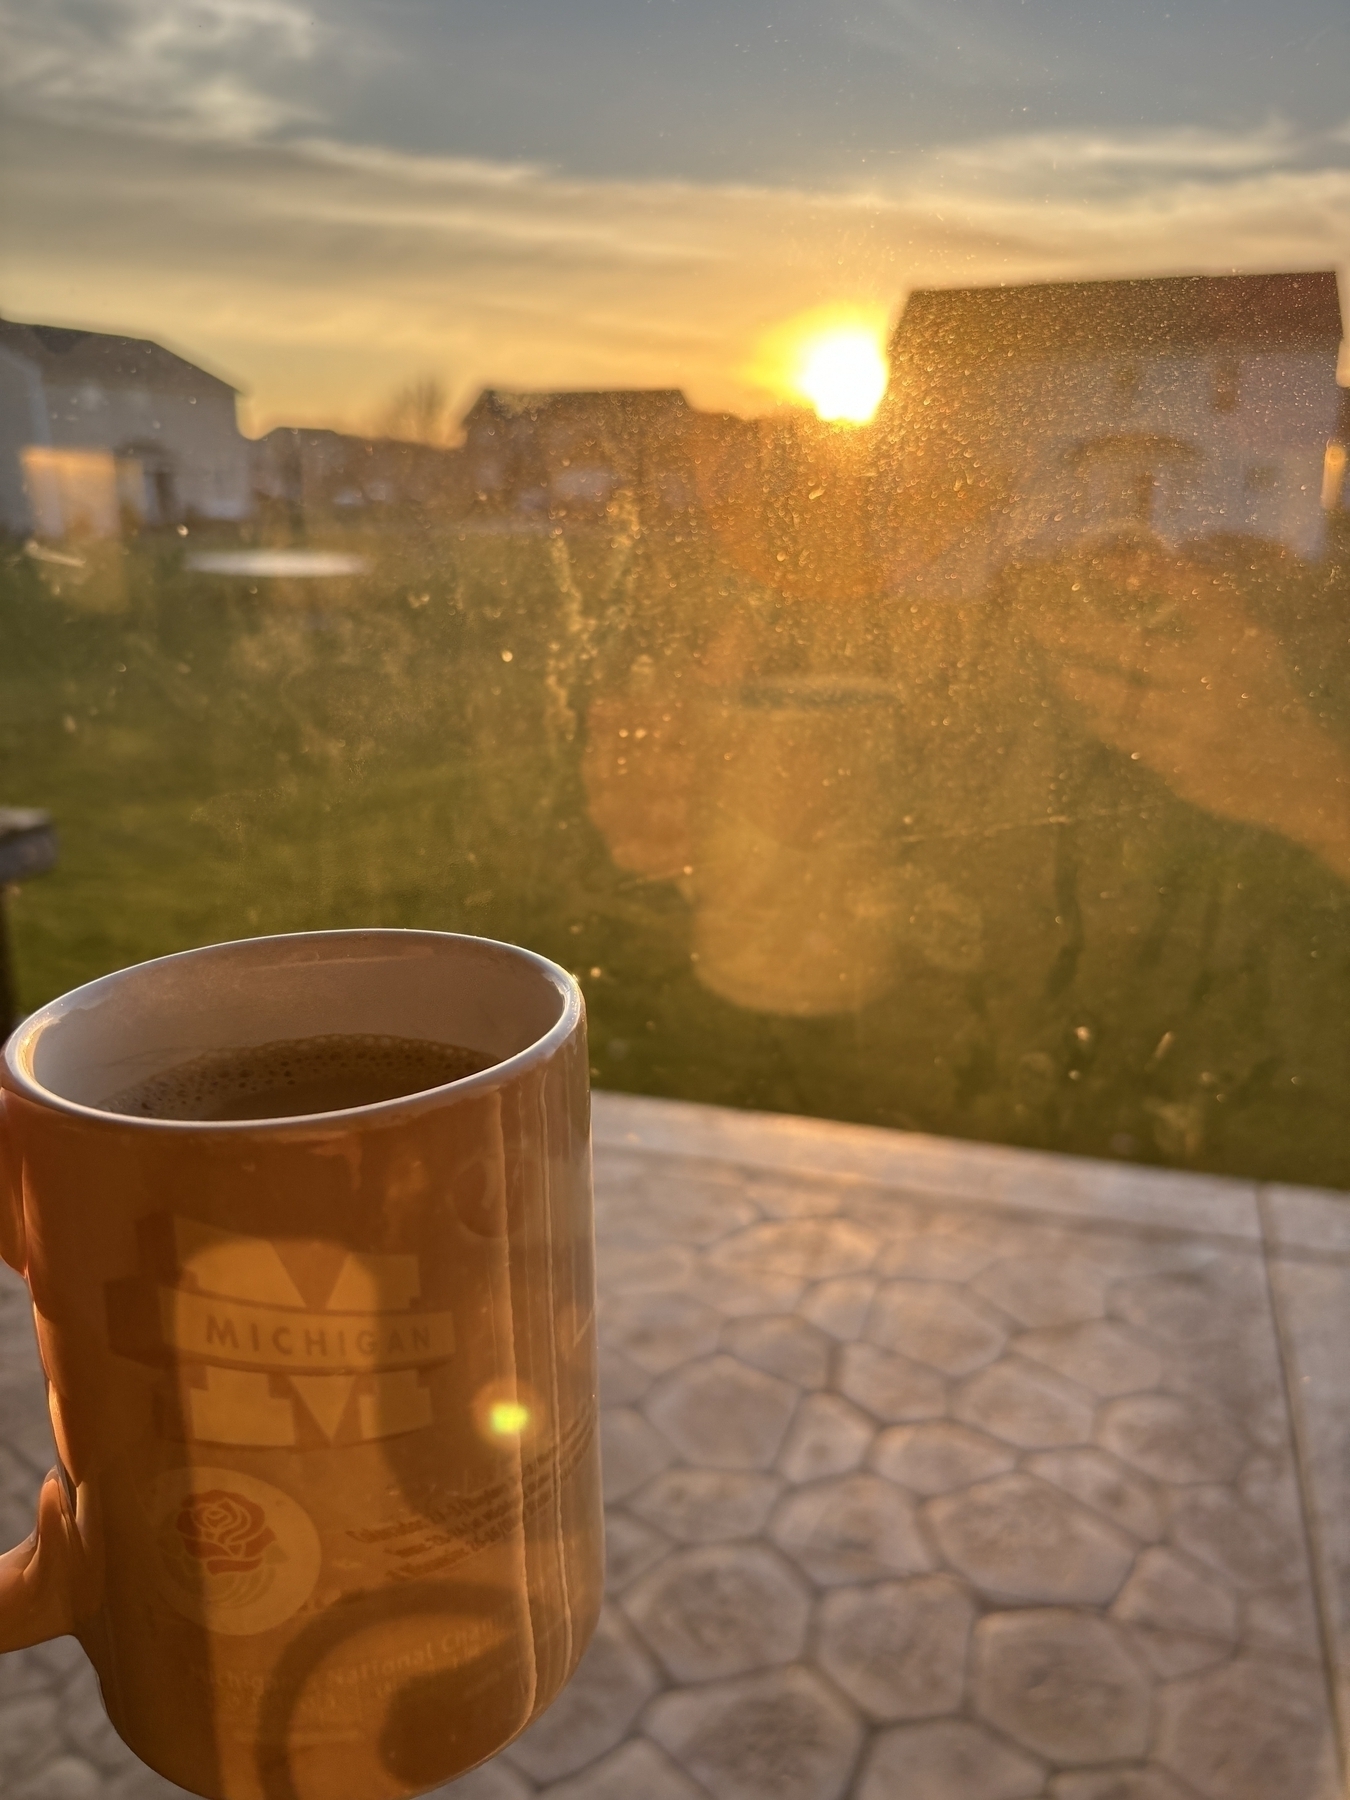 Coffee cup in the foreground while my reflection shows in a window looking over the sunrise. 